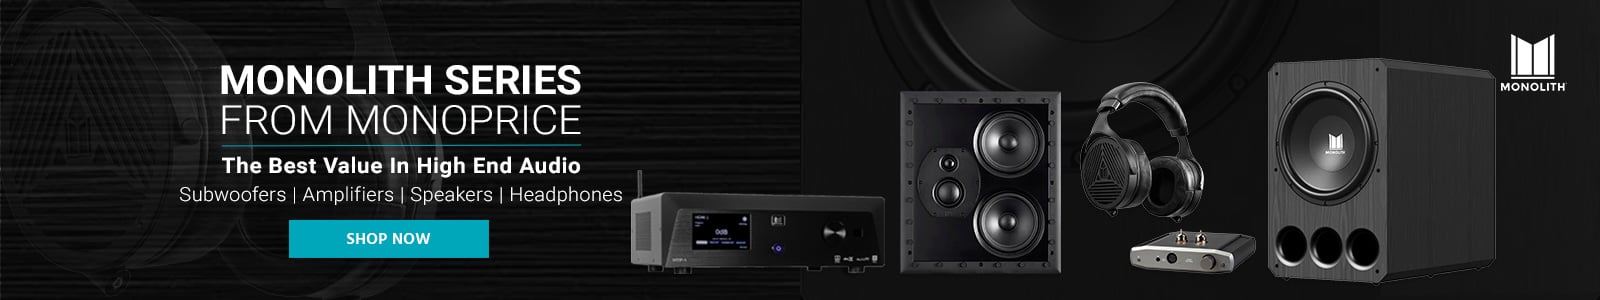 Monolith Series from Monoprice, The best value in high end audio, Subwoofers | Amplifiers | Speakers | Headphones Shop now